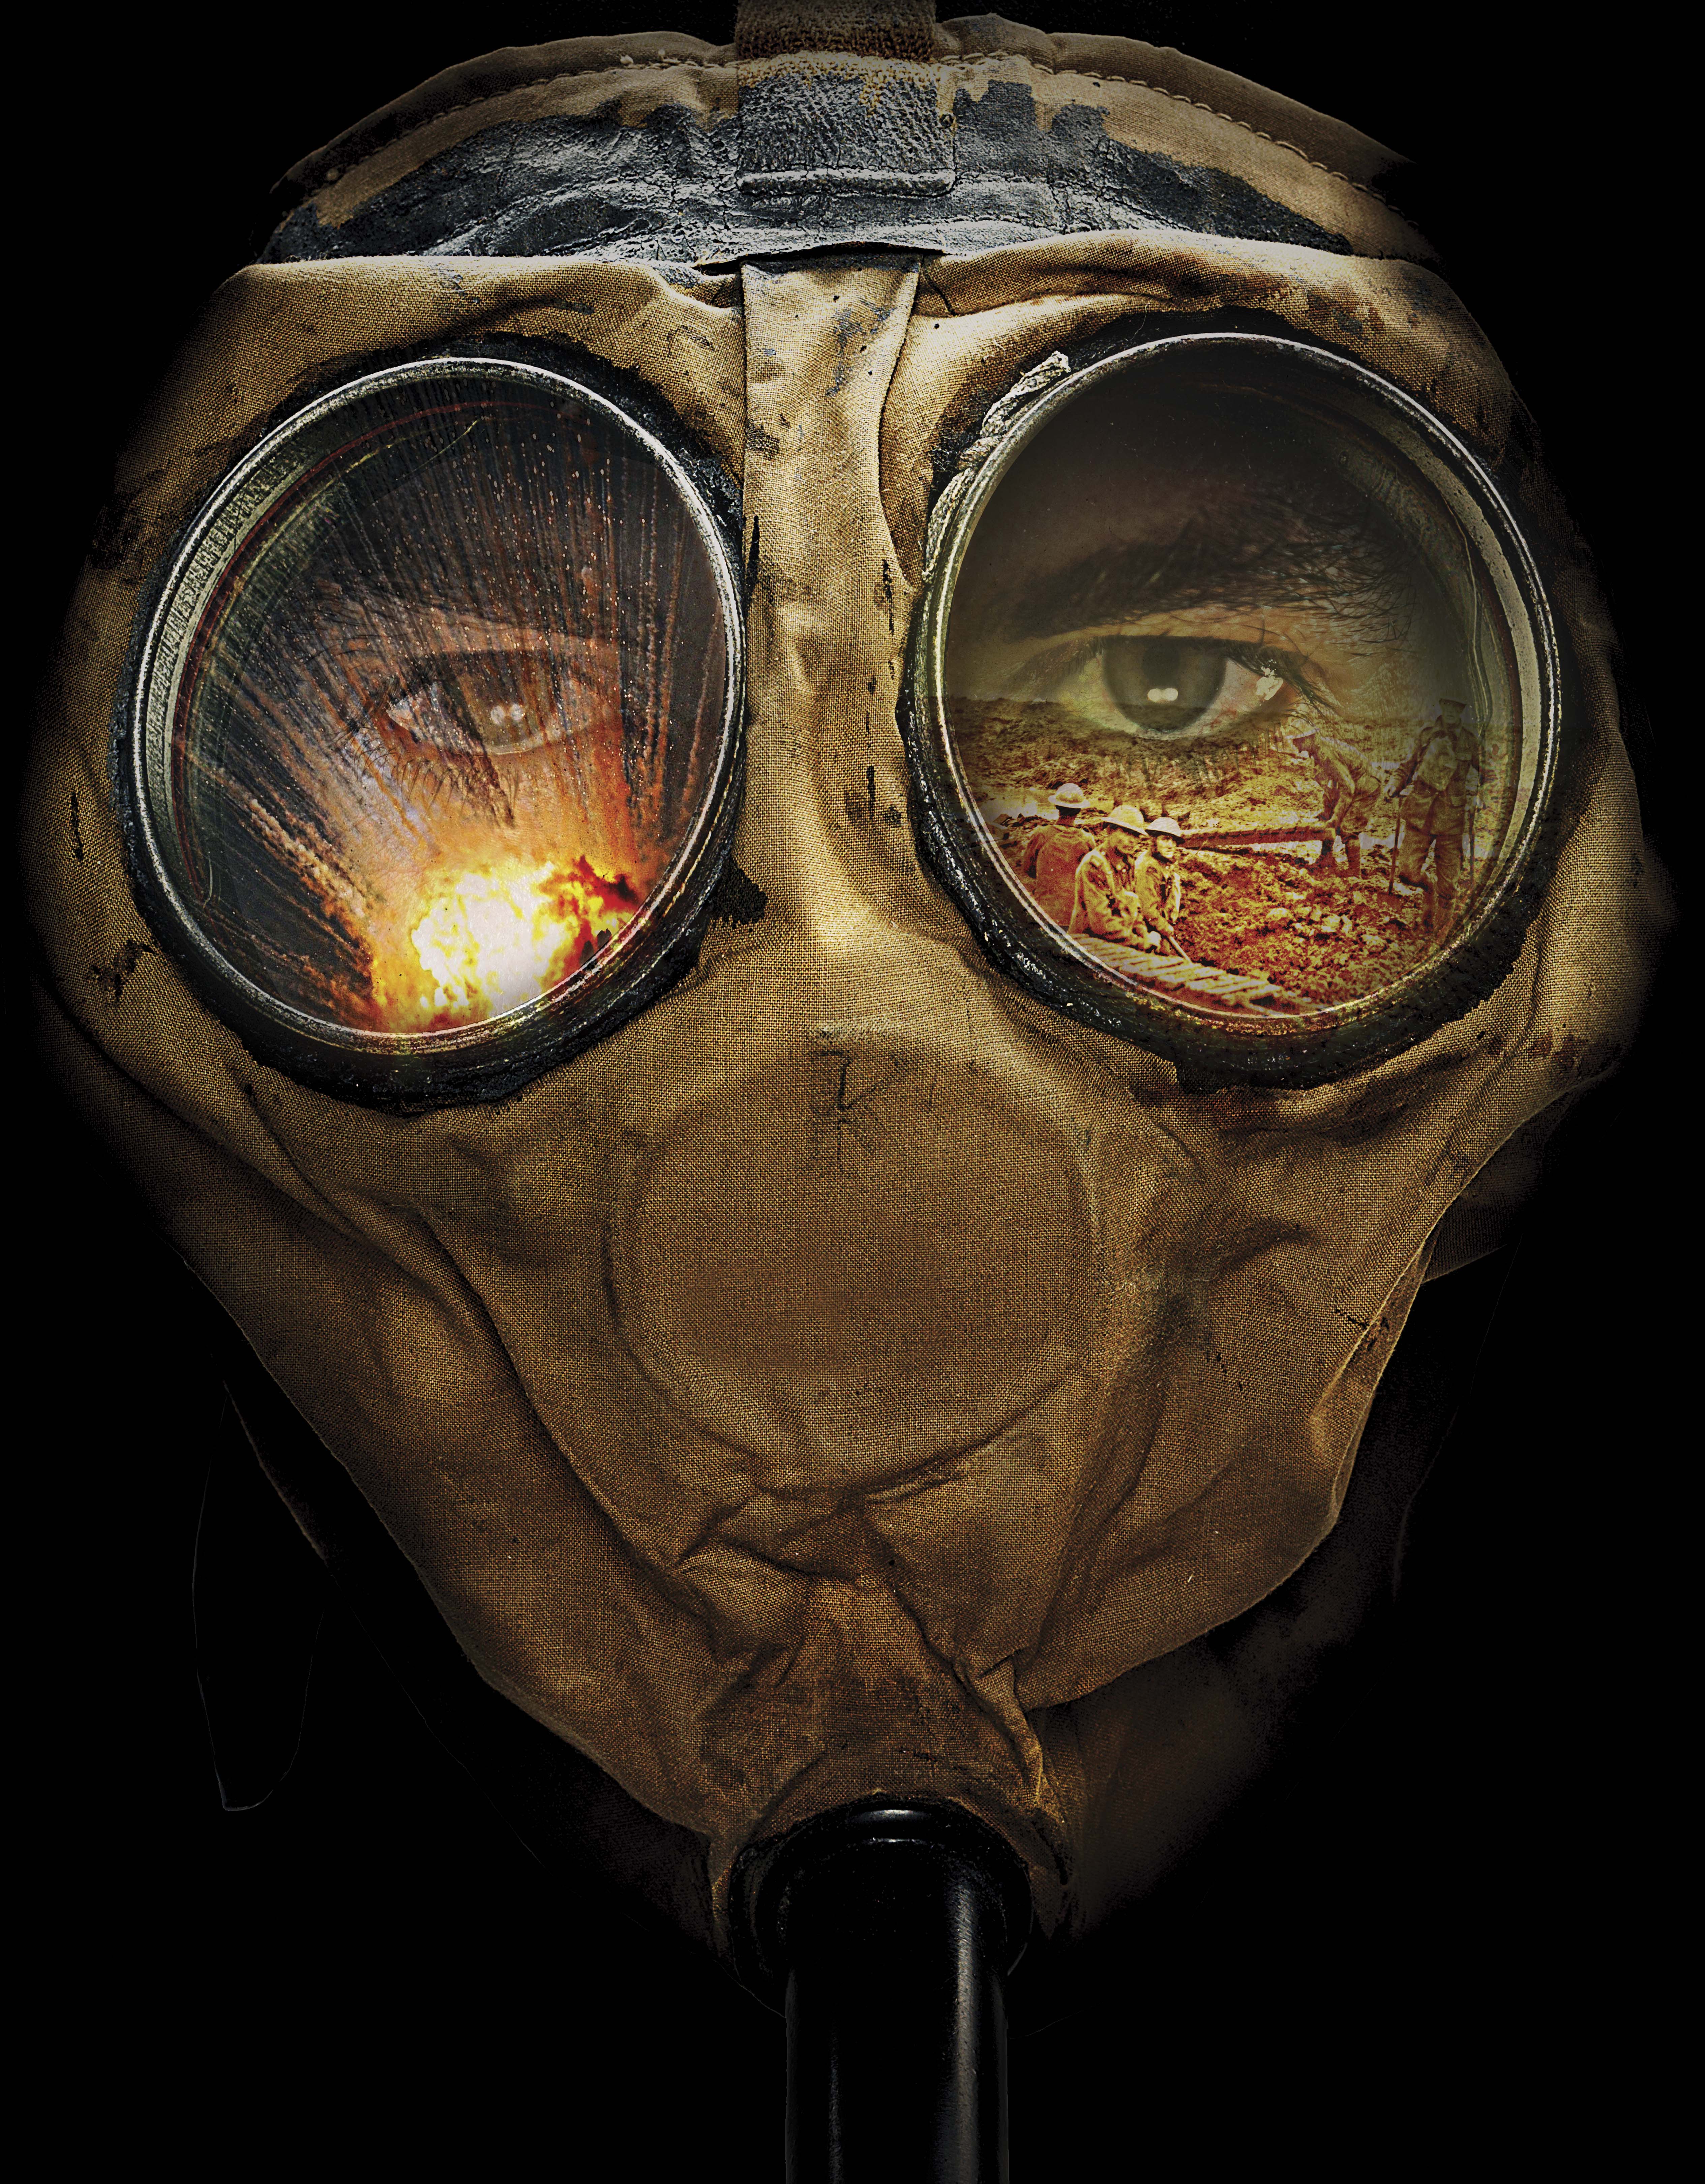 Dramatic graphic is of a man's face wearing a brown gas mask. The full face is covered except for large goggles over the eyes.